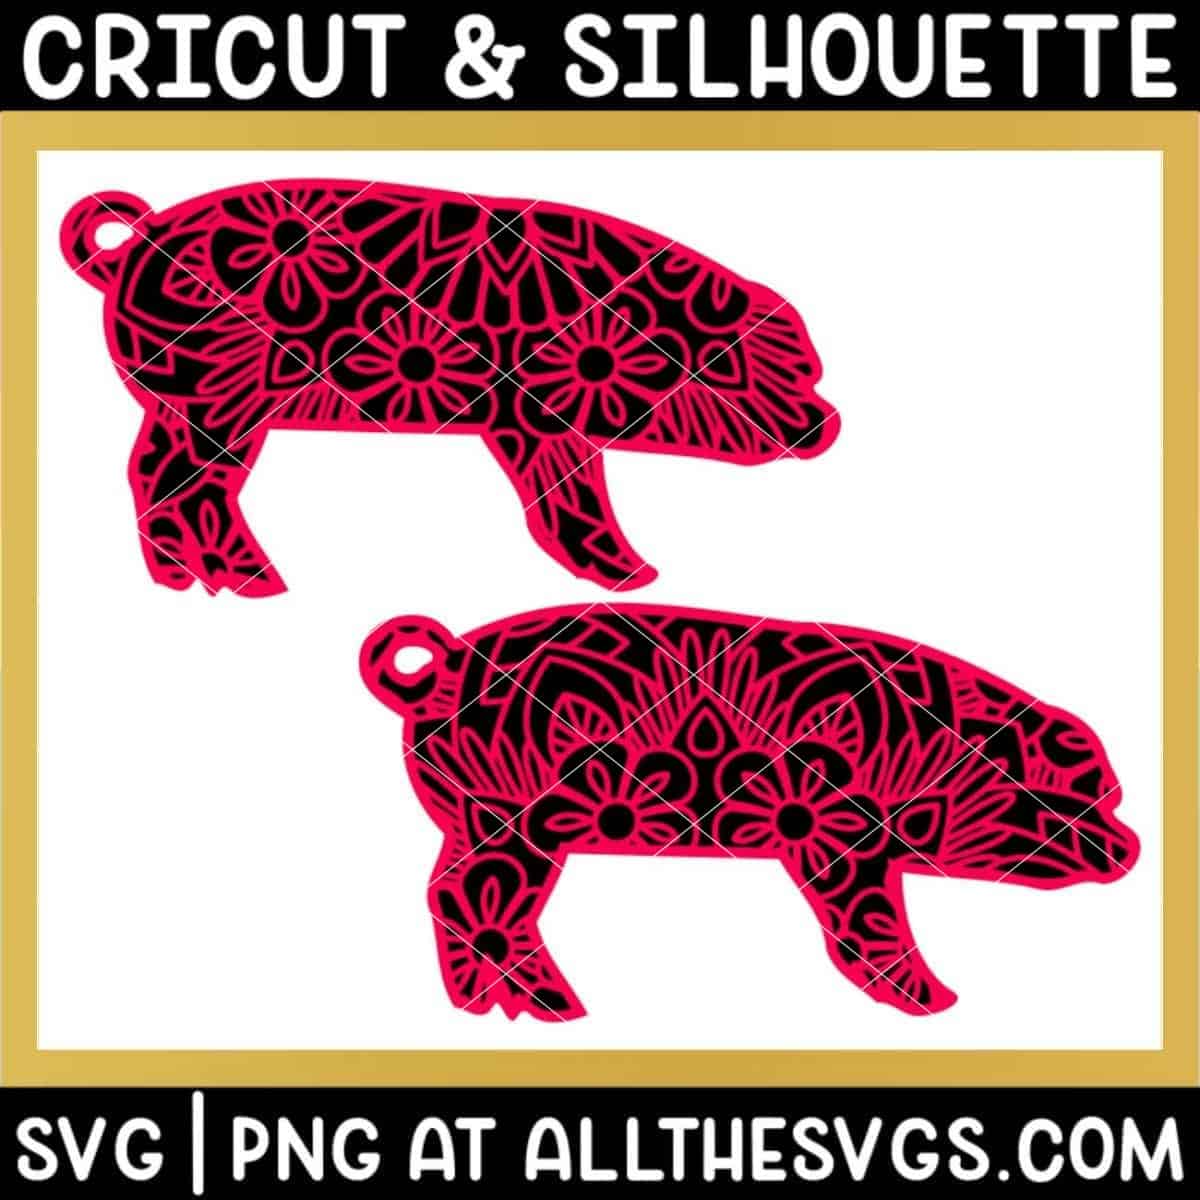 2 versions of pig boar farm animal svg file mandala center from belly and back.